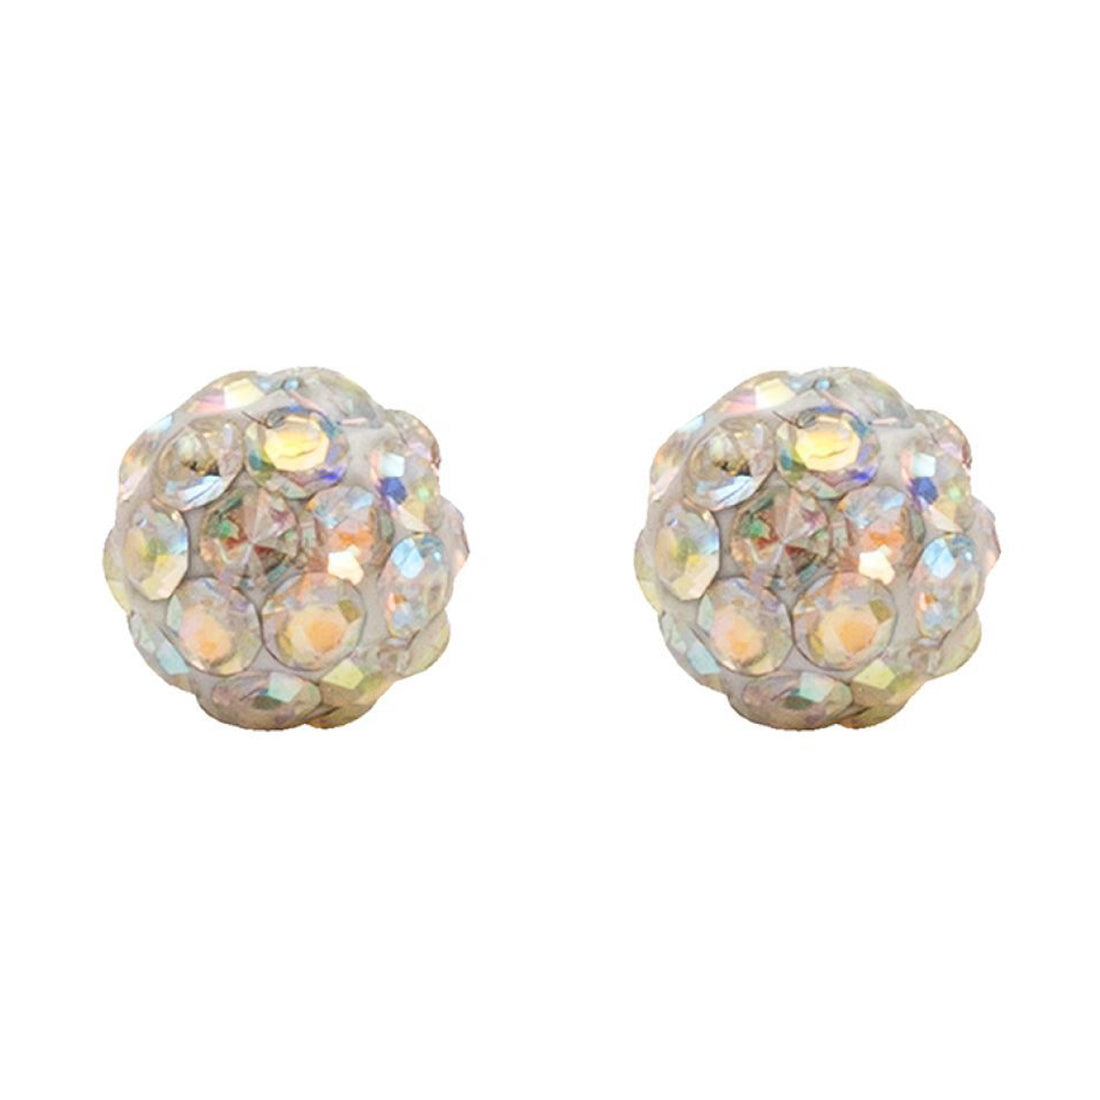 4.5MM Fireball AB Crystal Allergy Free Stainless Steel Ear Studs | Ideal for everyday wear